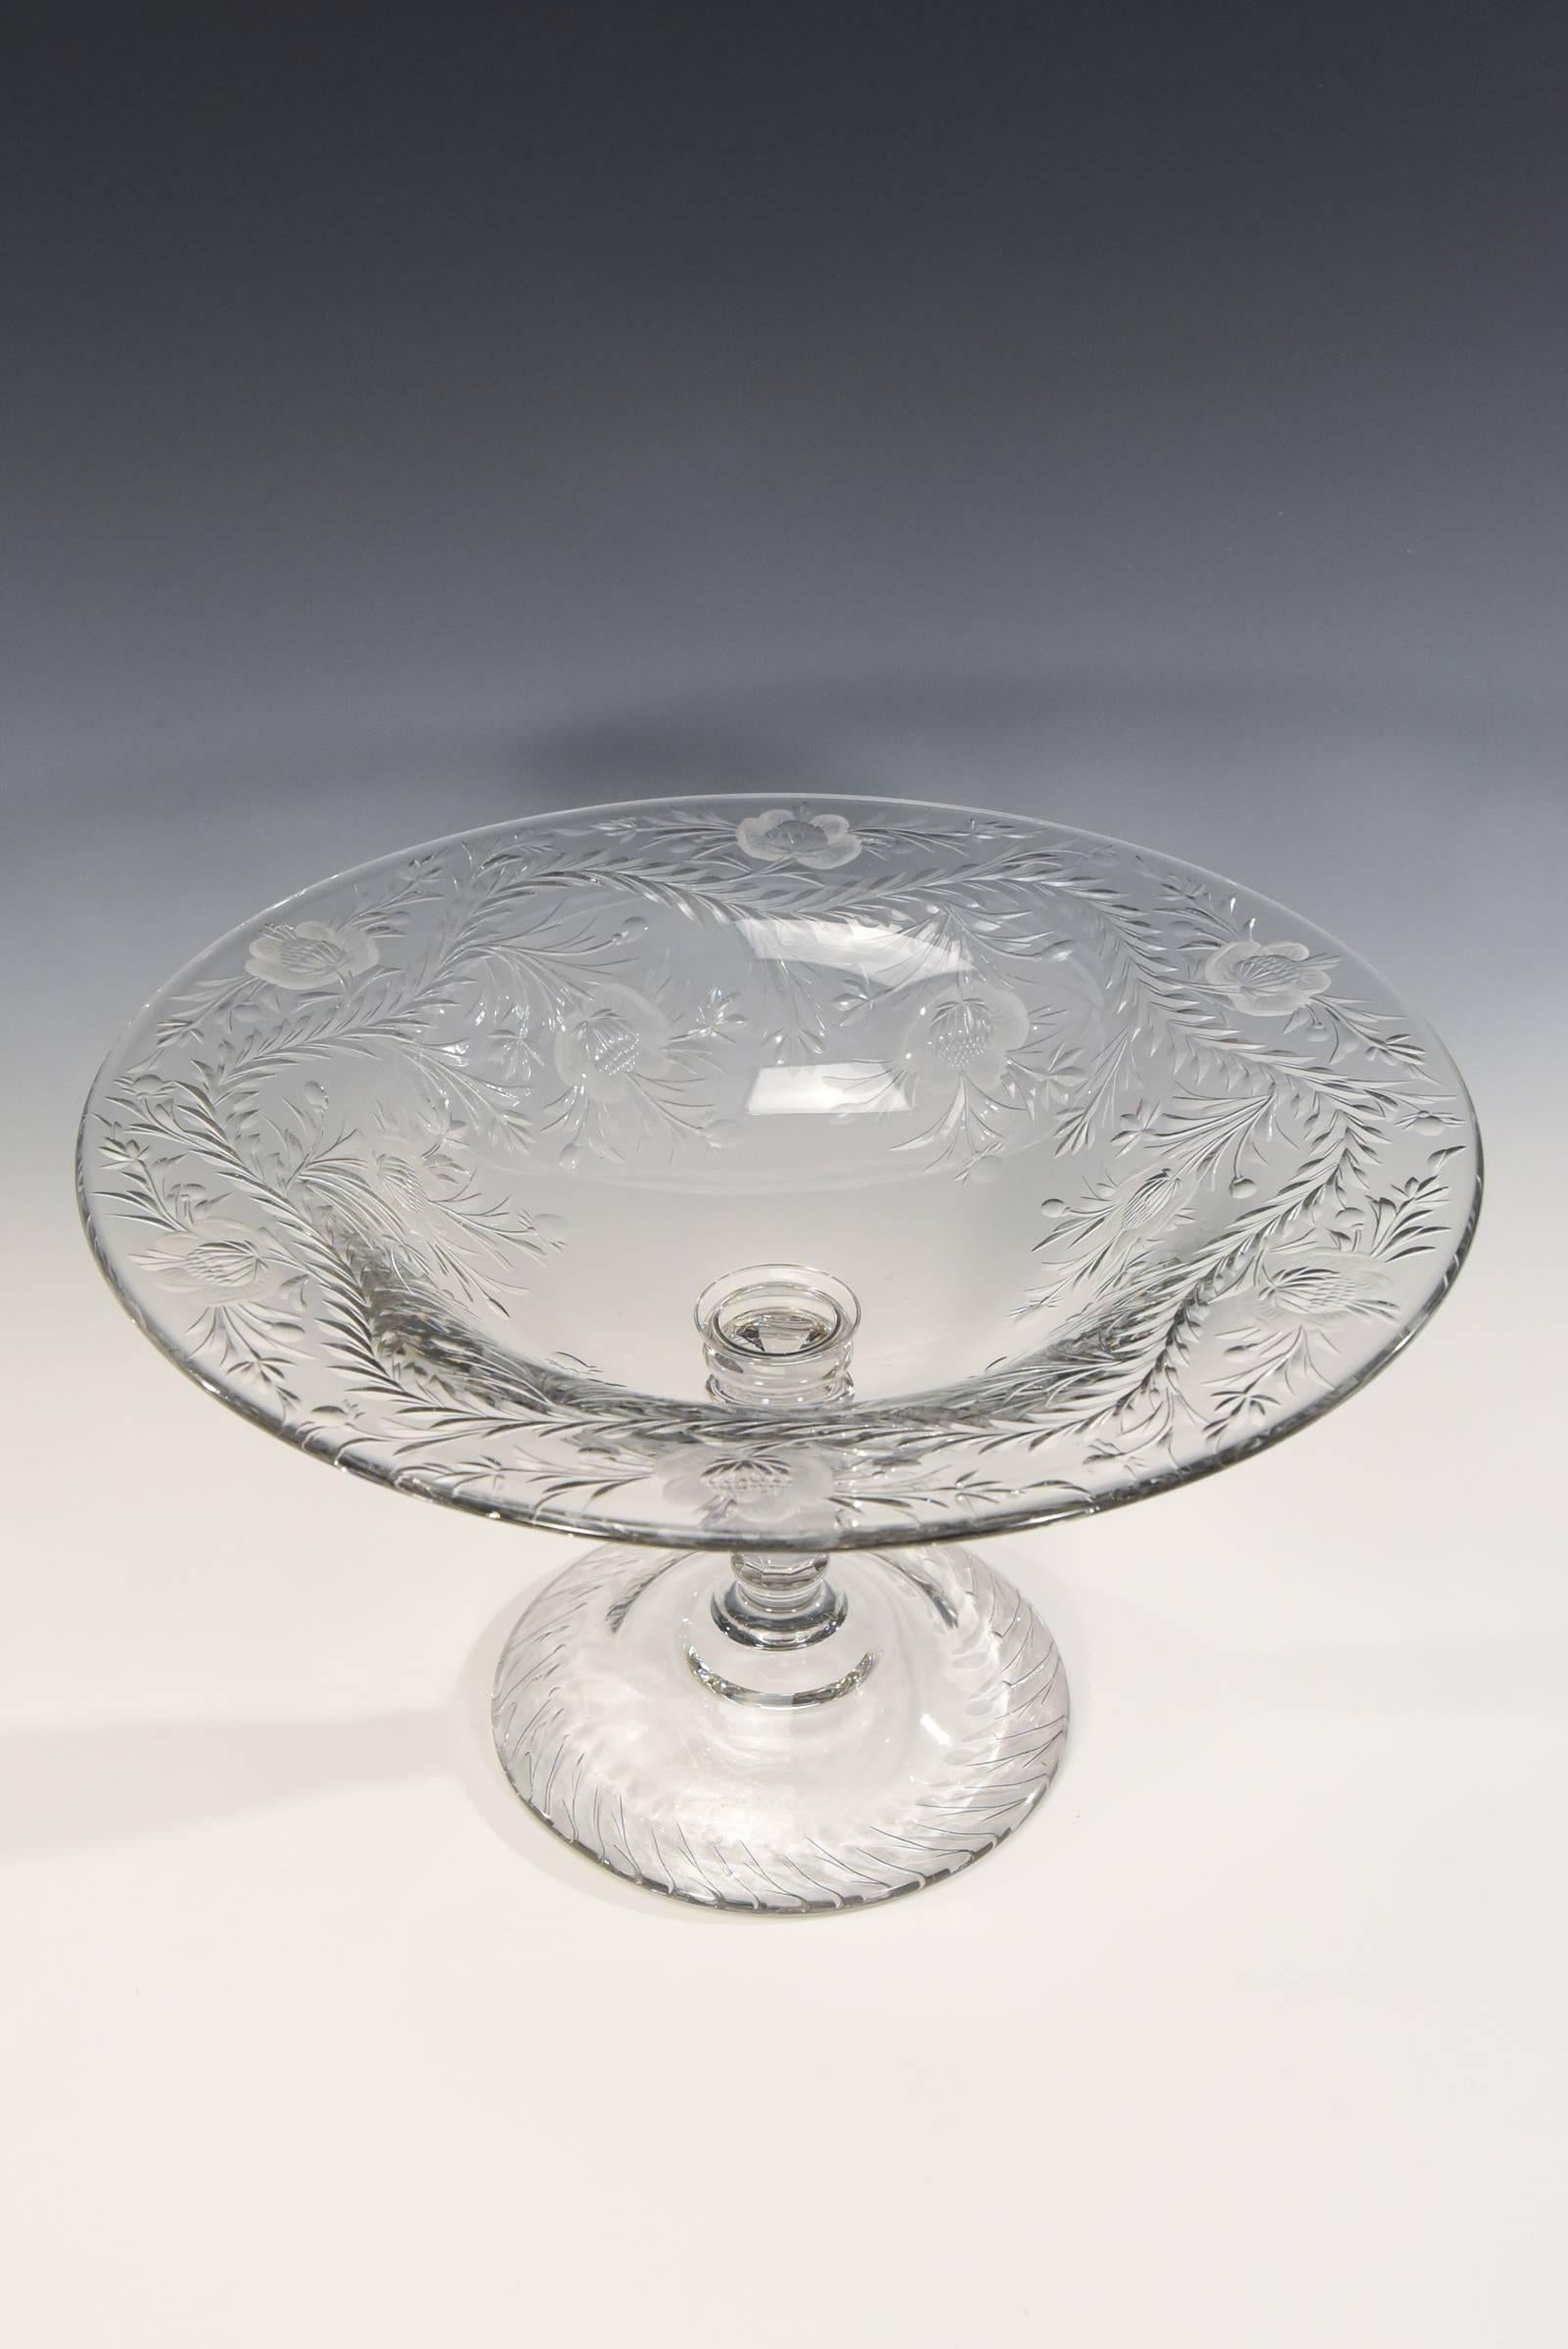 Engraved Webb Monumental Blown Crystal Footed Centerpiece w/ Wheel Cut Floral Engraving  For Sale